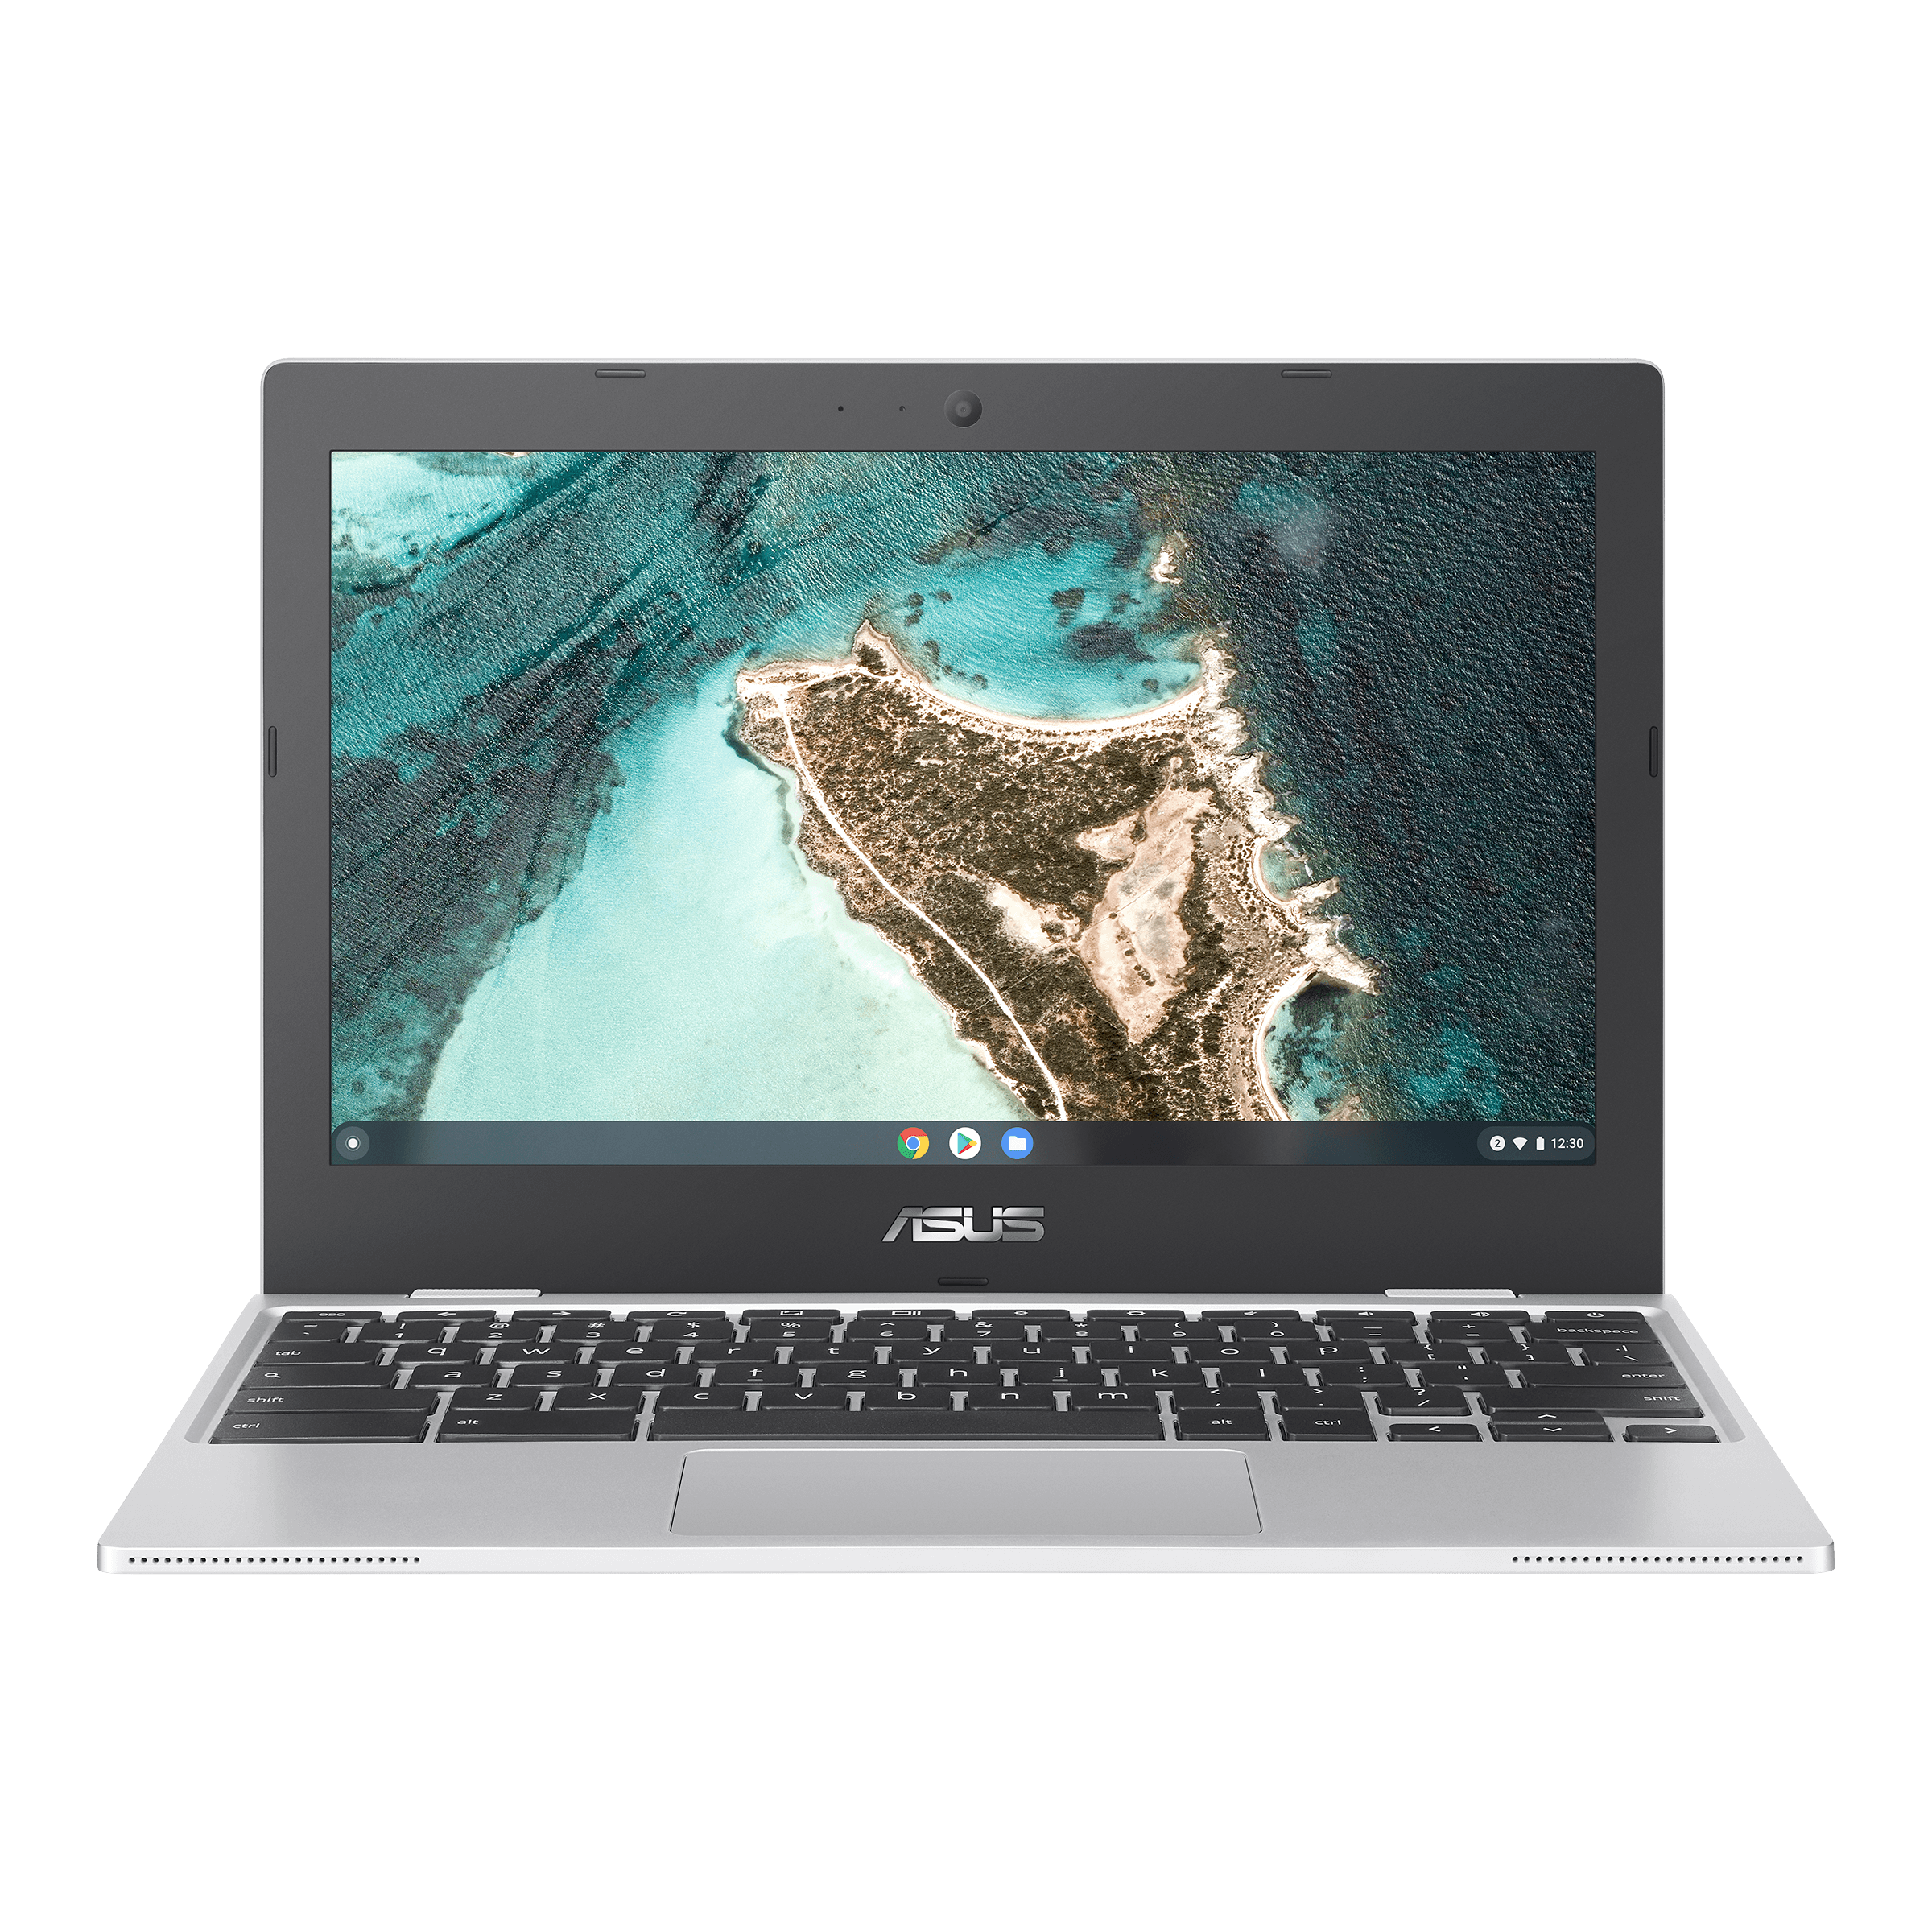 ASUS Chromebook CX1 (CX1100)｜Laptops For Home｜ASUS USA